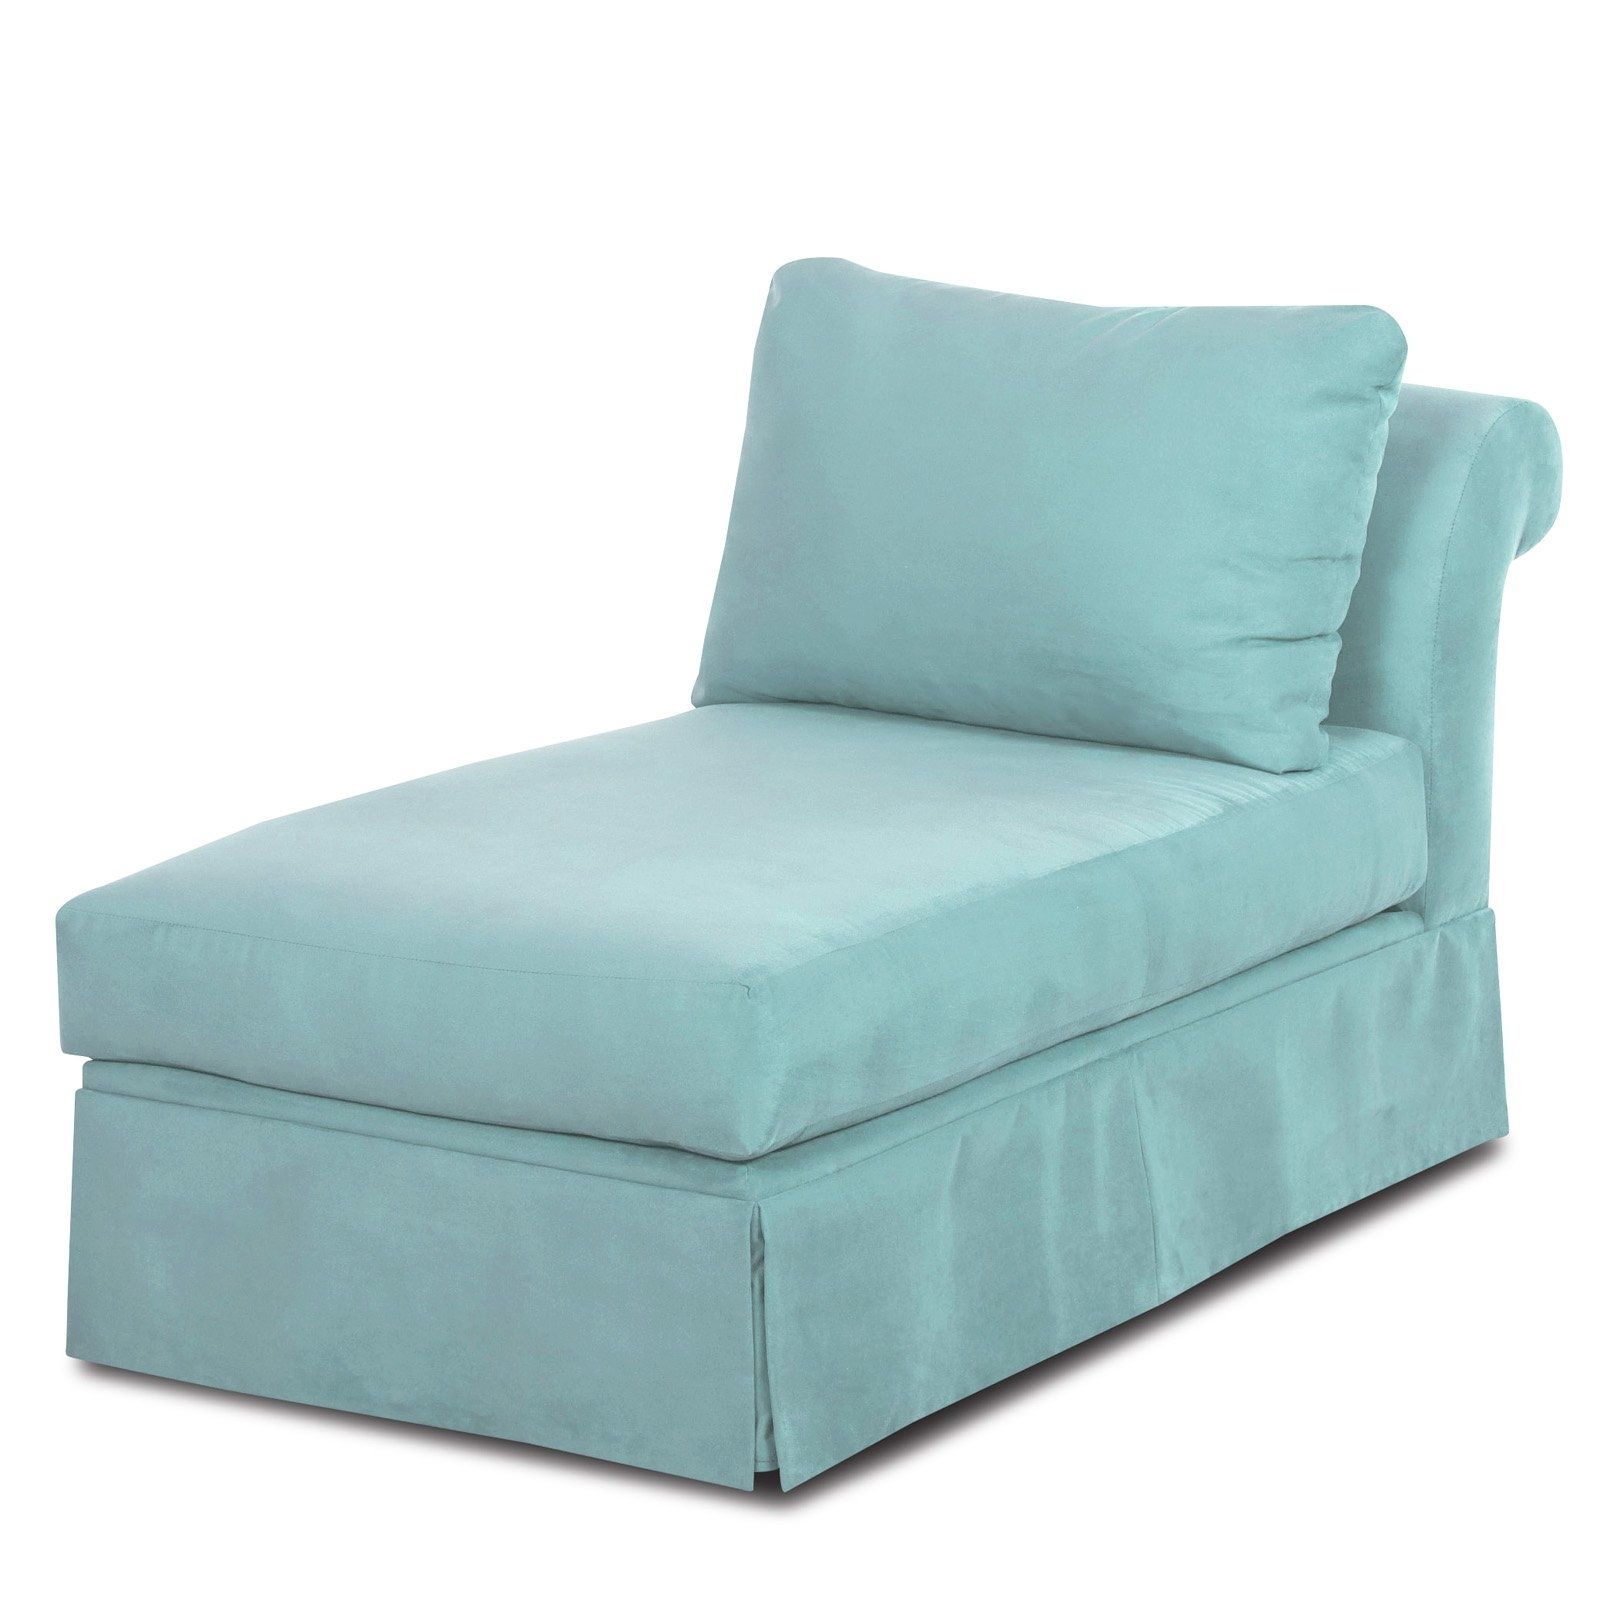 Indoor Chaise Lounge Chairs – Home Designs Ideas Online Throughout Most Popular Indoor Chaise Lounge Slipcovers (View 5 of 15)